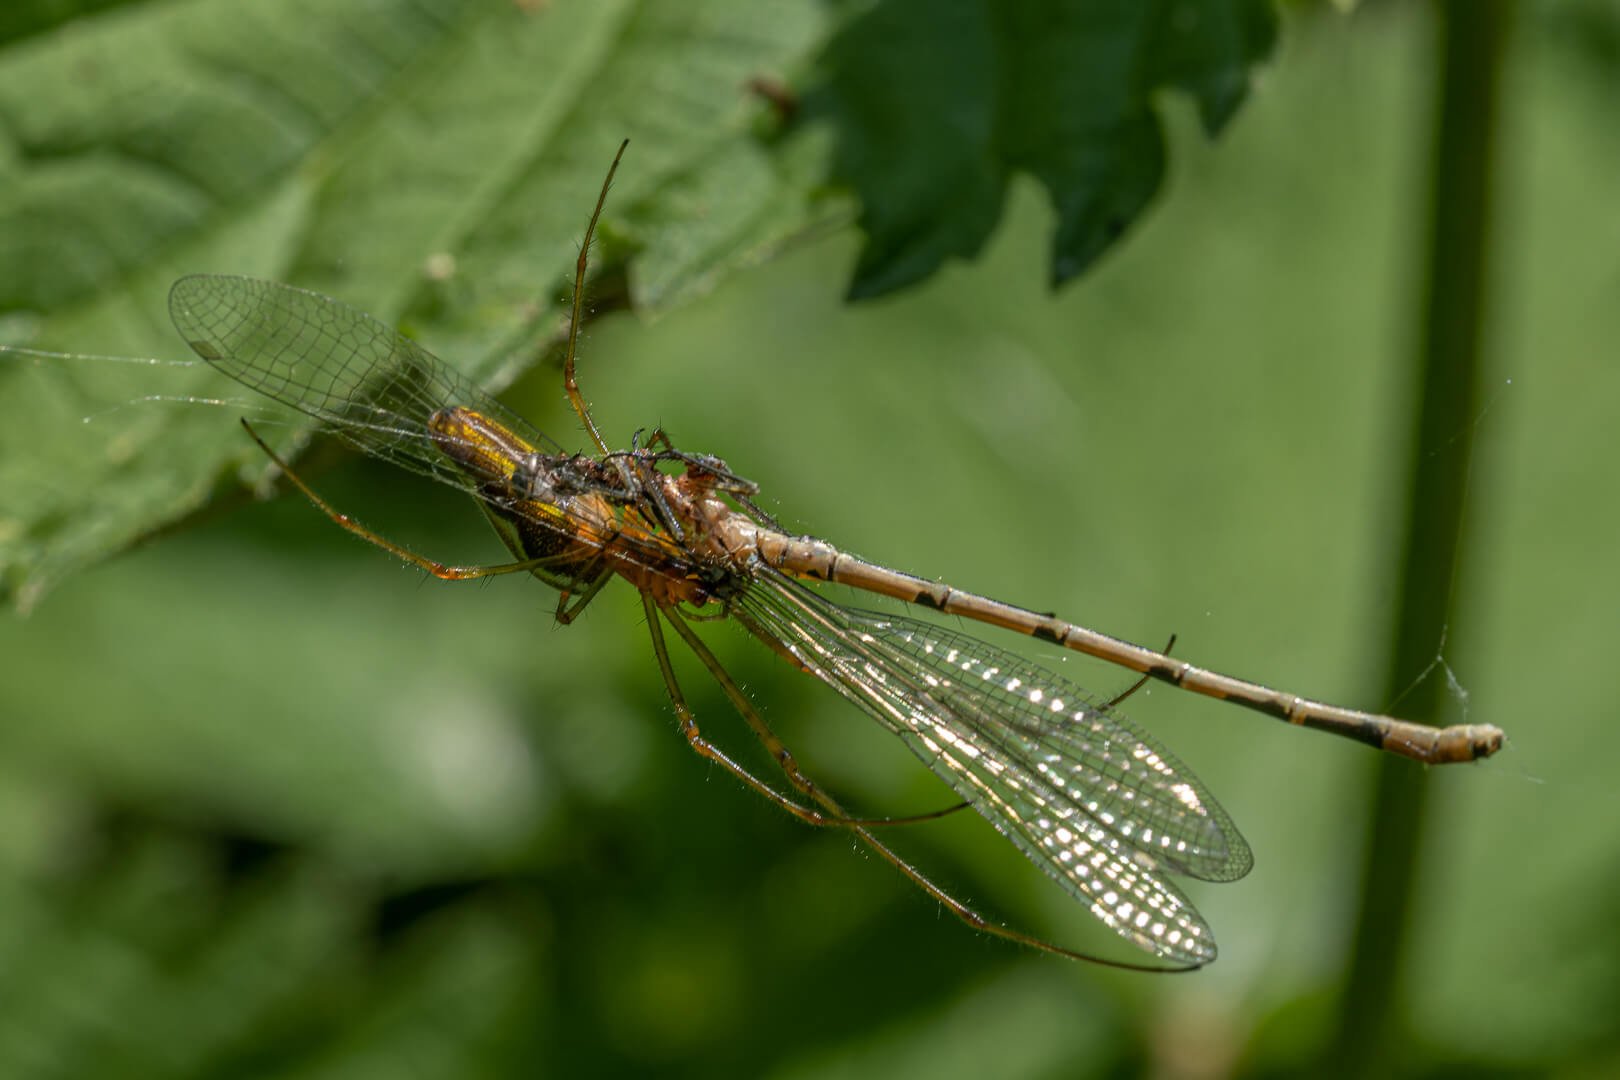 Long Jawed Orb Spider and a female Blue-tailed Damsel Fly  by David Fraser